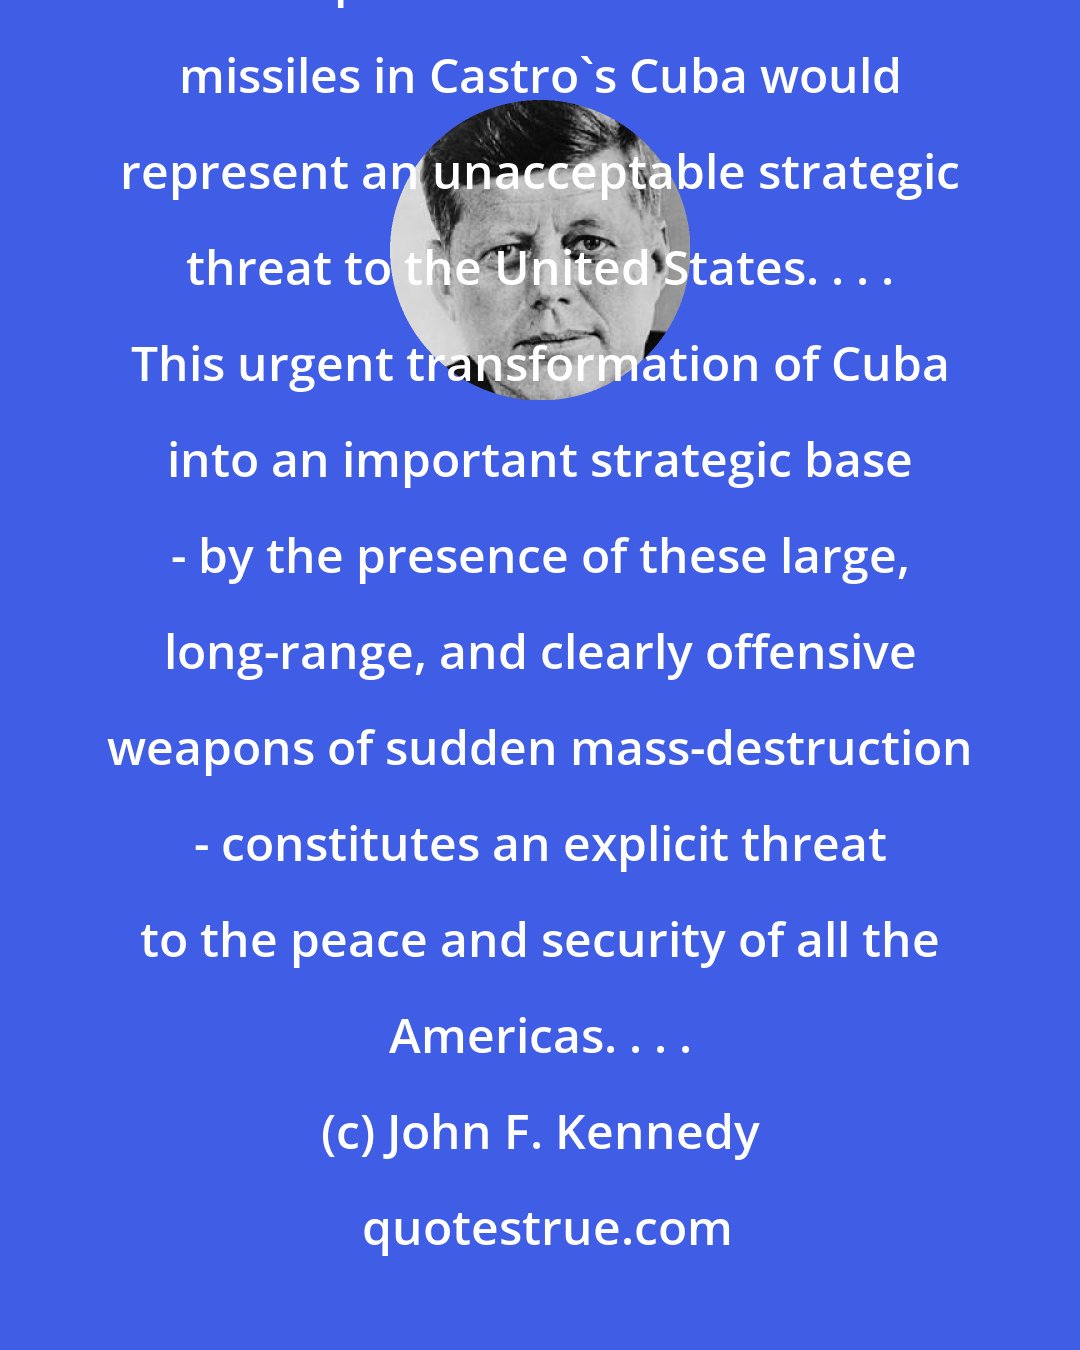 John F. Kennedy: The Kennedy Administration's public pronouncements on the matter suggested that the presence of Soviet nuclear missiles in Castro's Cuba would represent an unacceptable strategic threat to the United States. . . . This urgent transformation of Cuba into an important strategic base - by the presence of these large, long-range, and clearly offensive weapons of sudden mass-destruction - constitutes an explicit threat to the peace and security of all the Americas. . . .